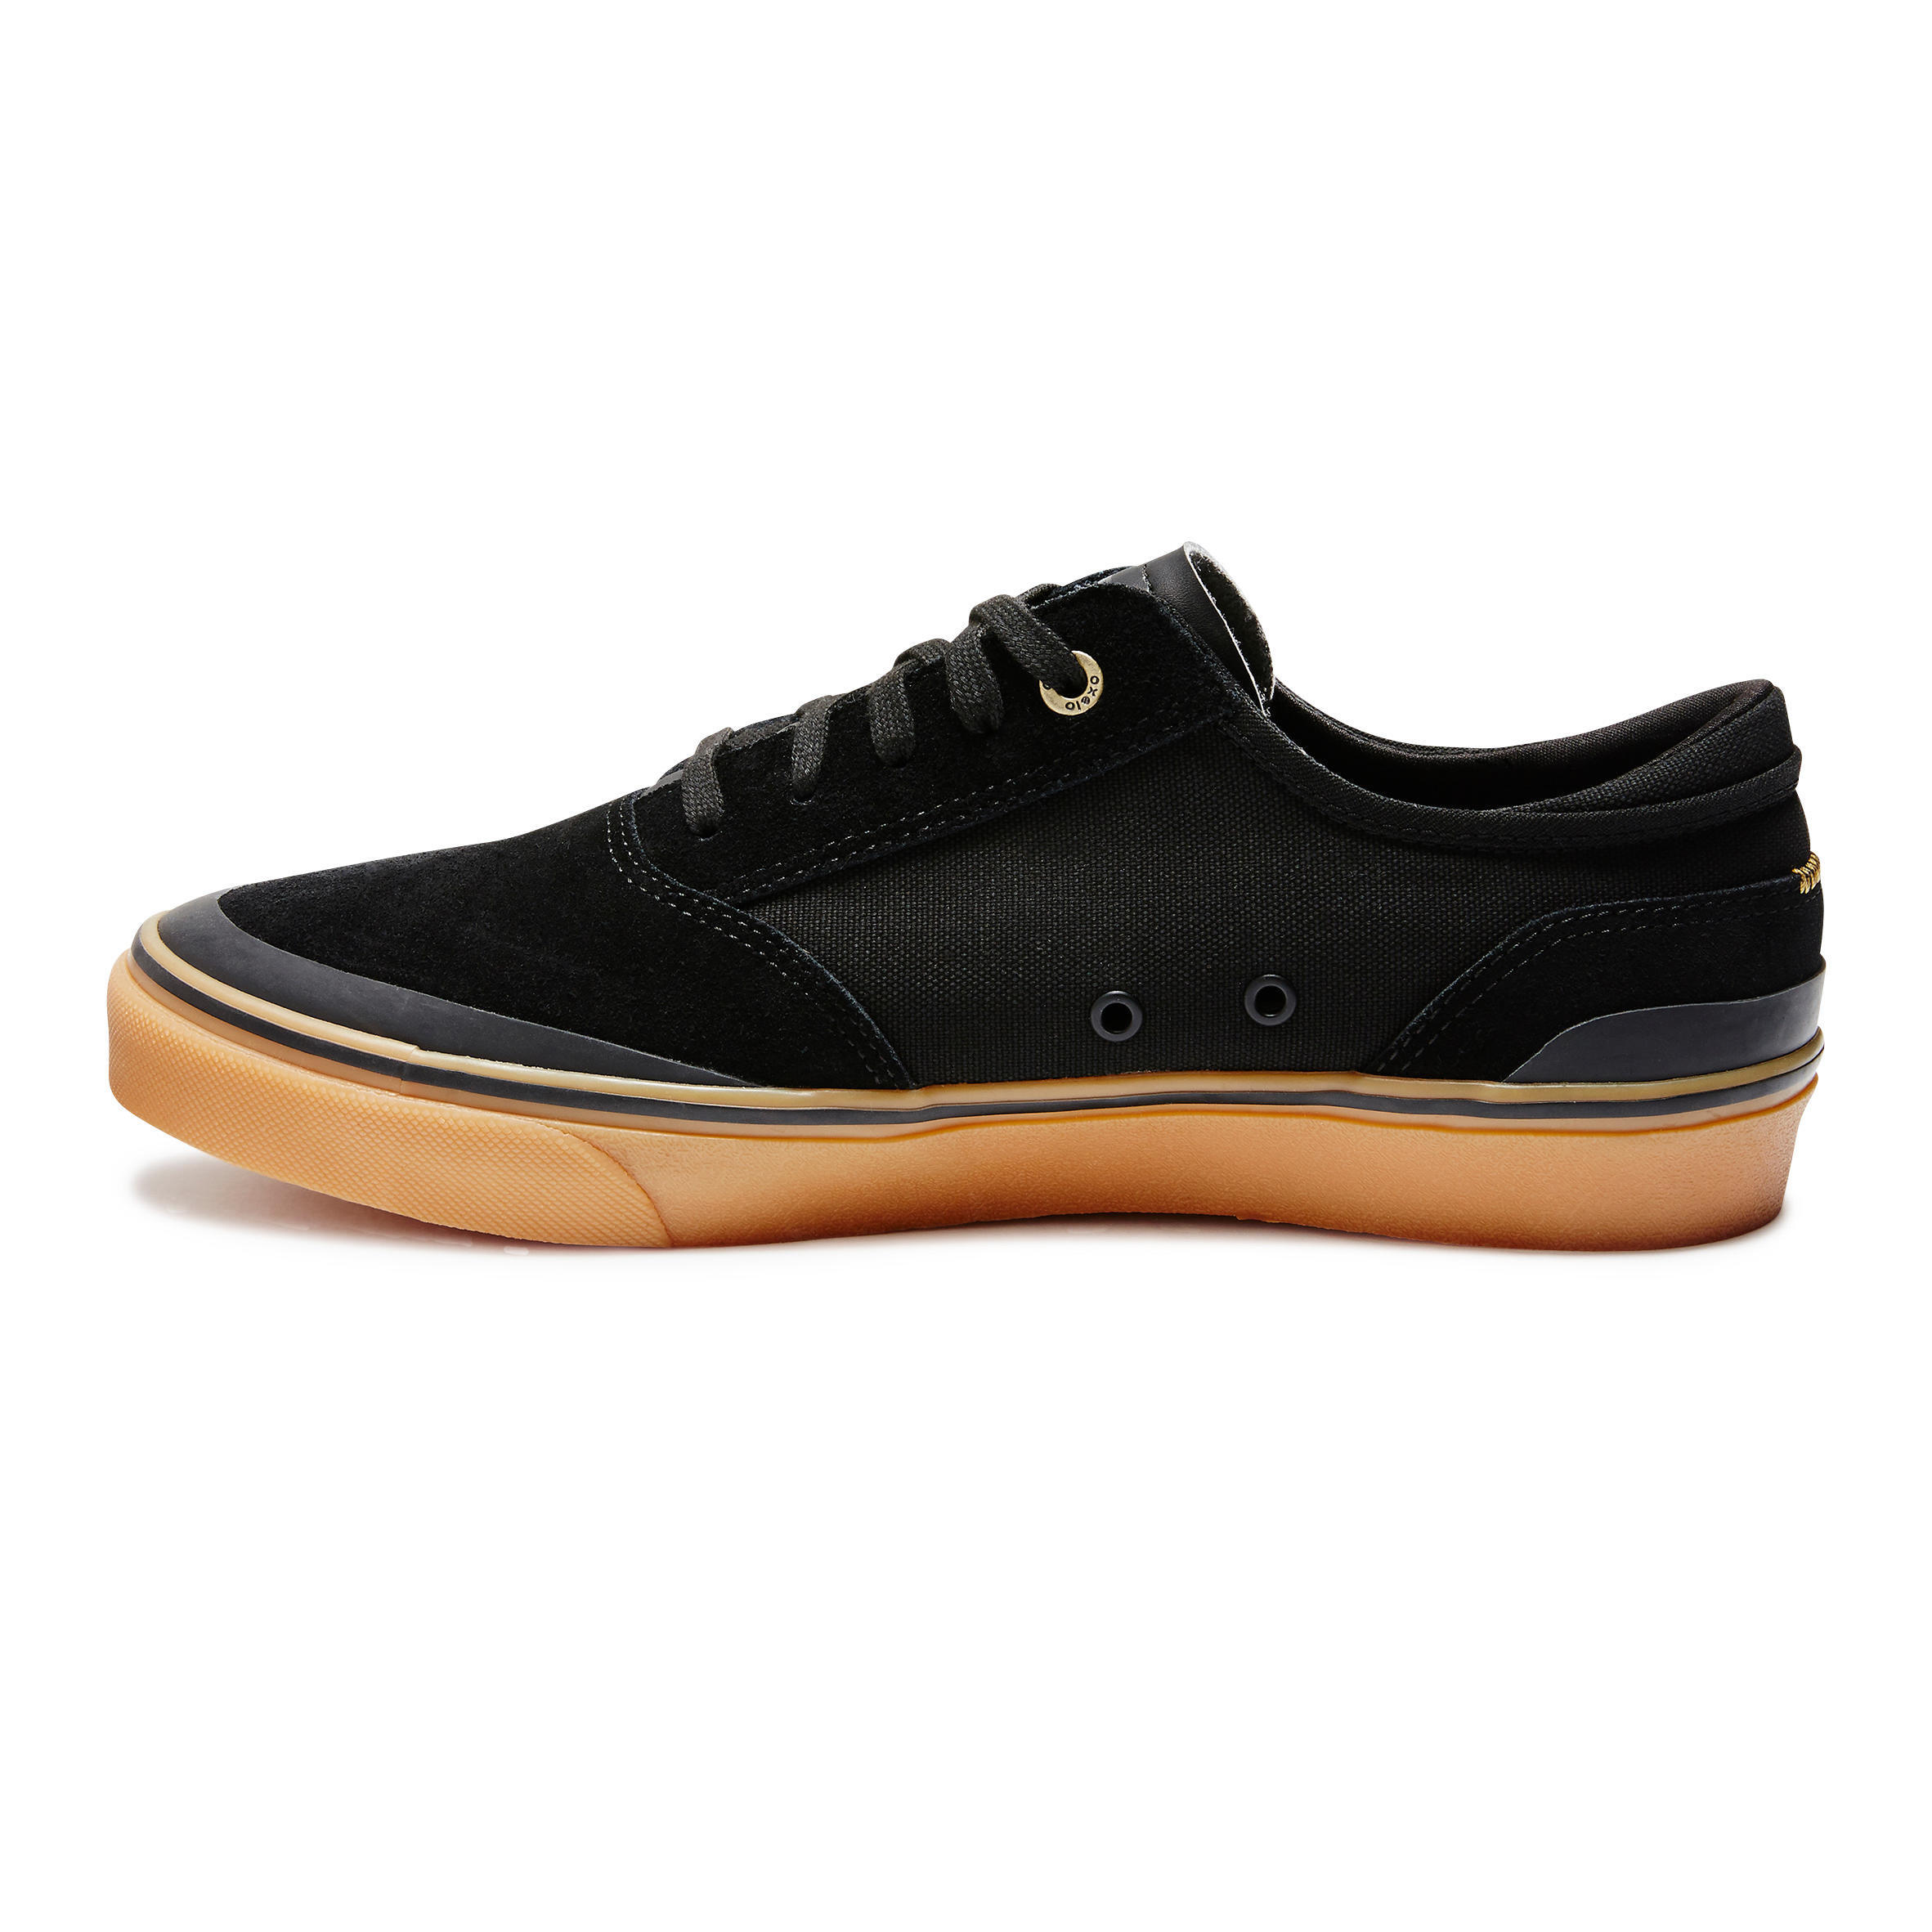 Vulca 500 Adult Low-Top Skate Shoes - Black/Rubber Sole 3/6